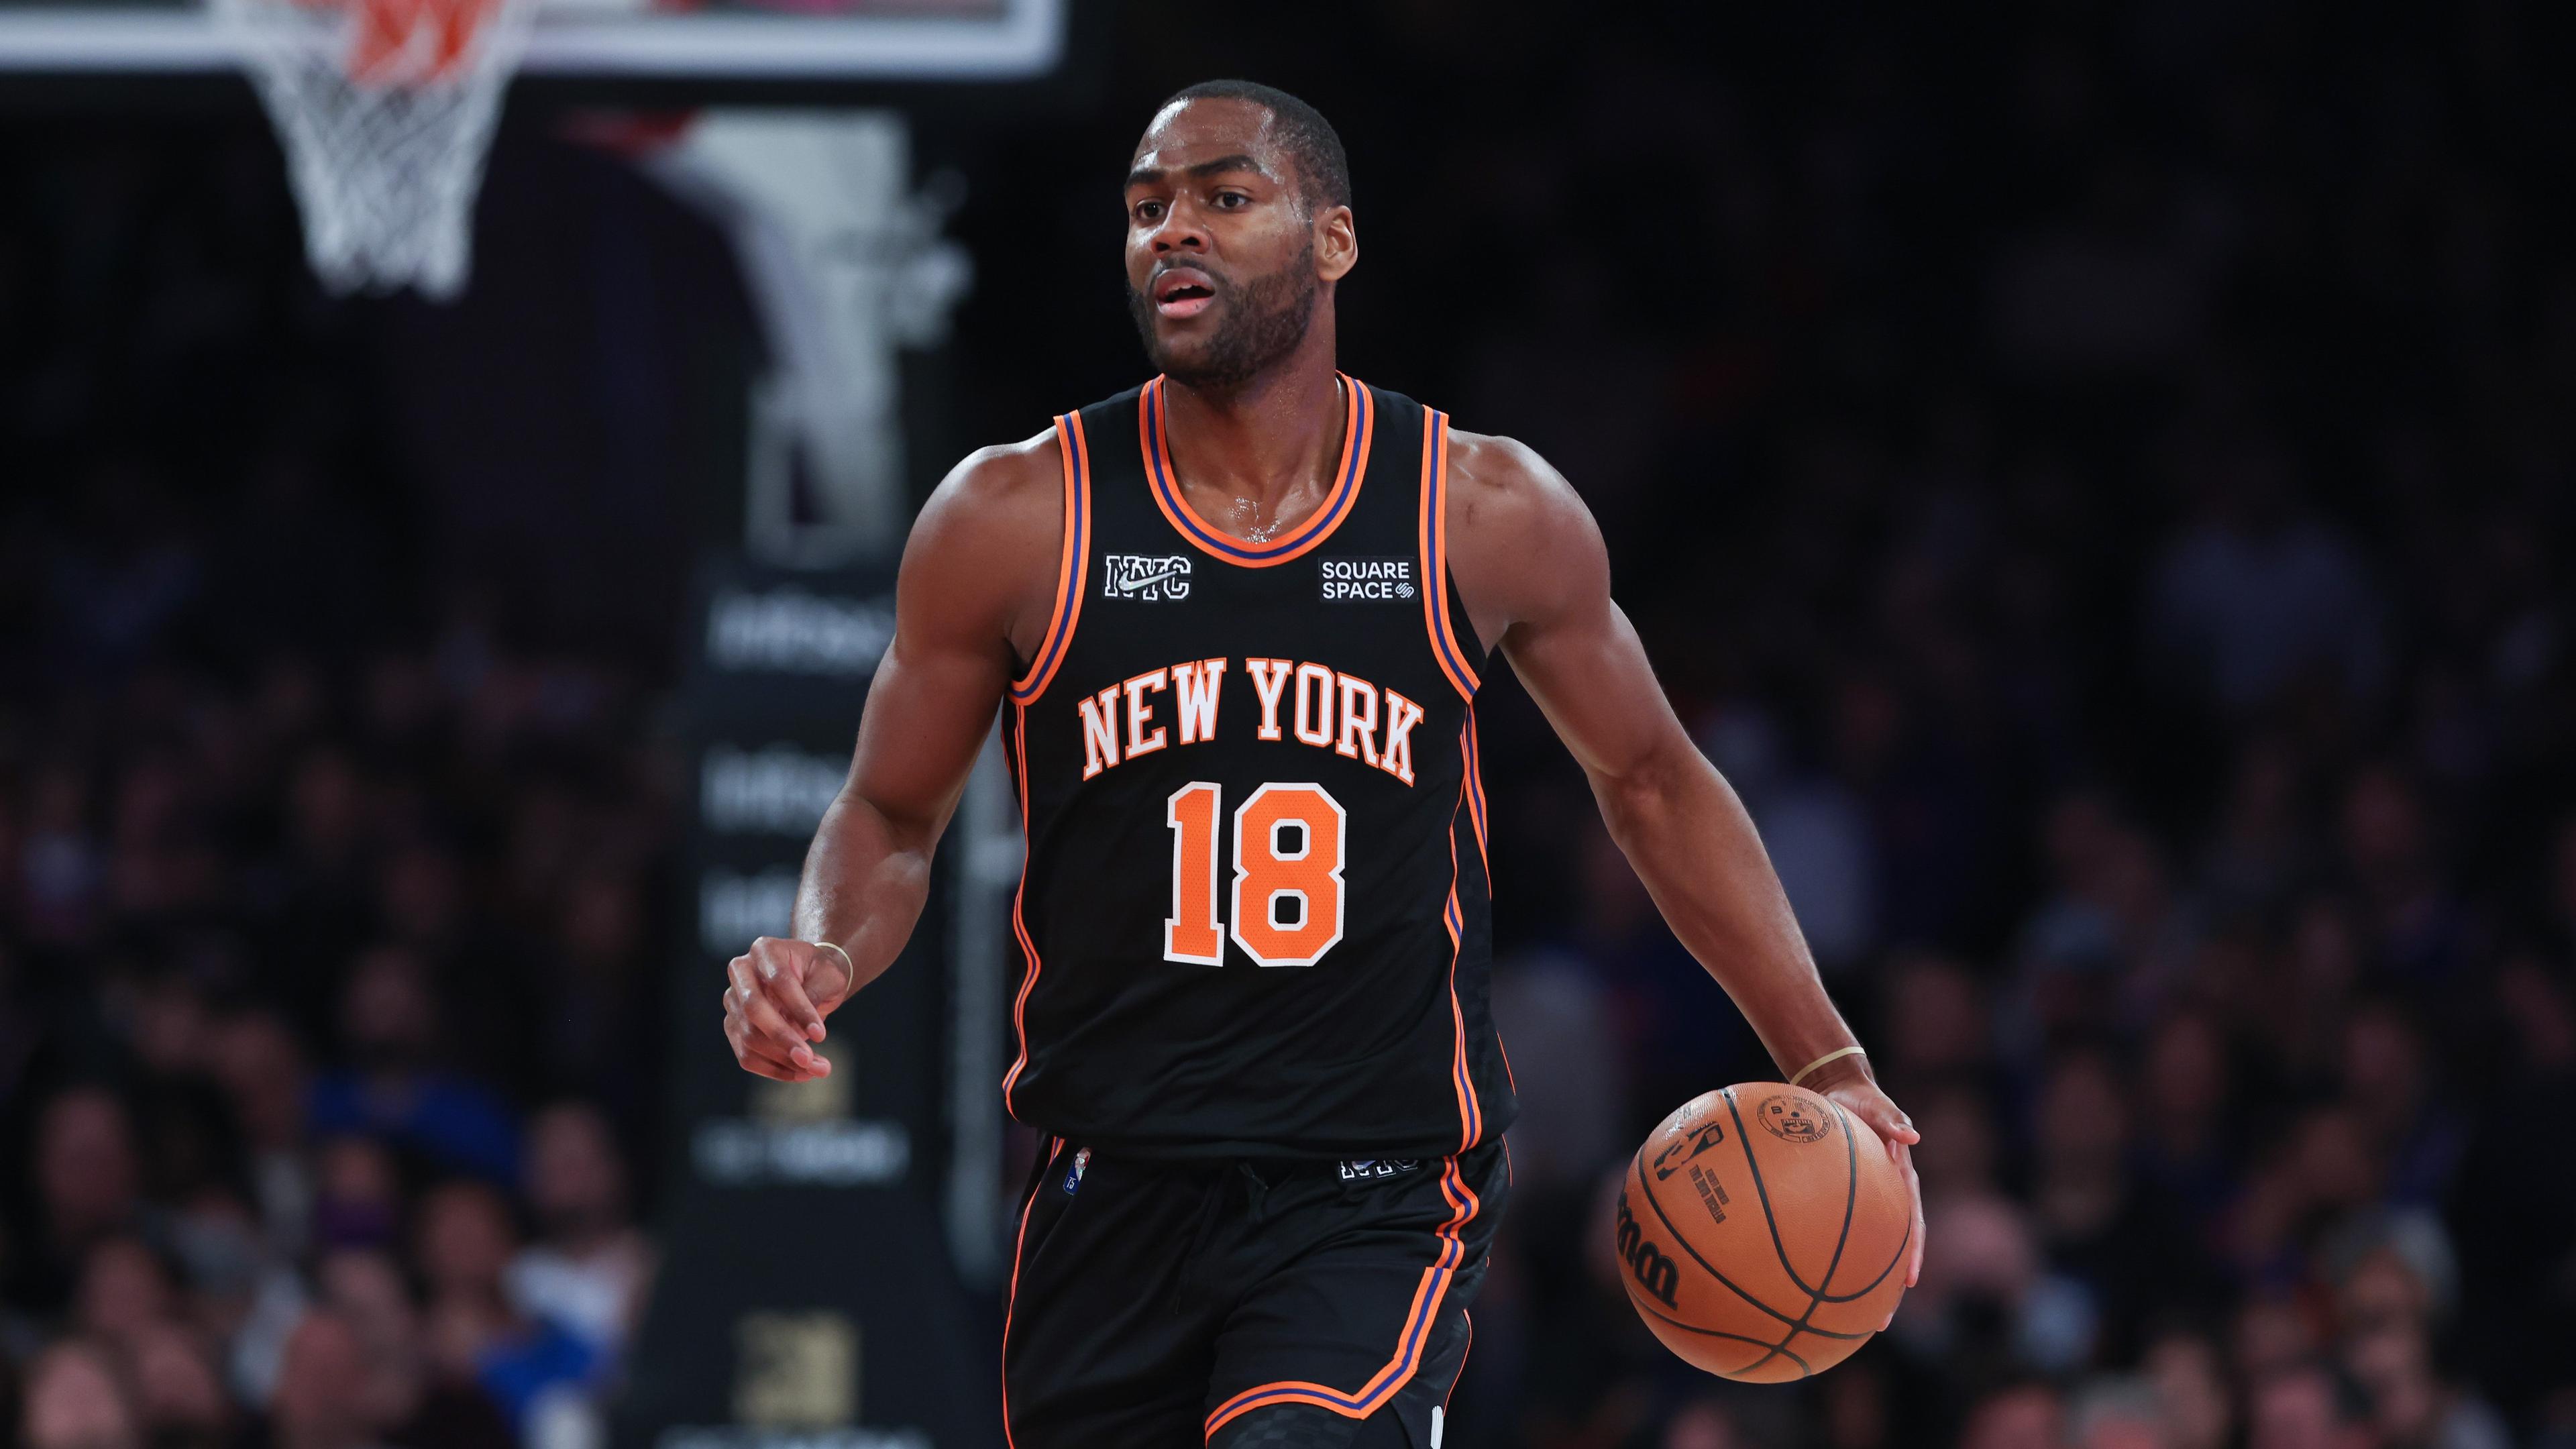 New York Knicks guard Alec Burks (18) dribbles up court against the Phoenix Suns during the first half at Madison Square Garden. / Vincent Carchietta-USA TODAY Sports